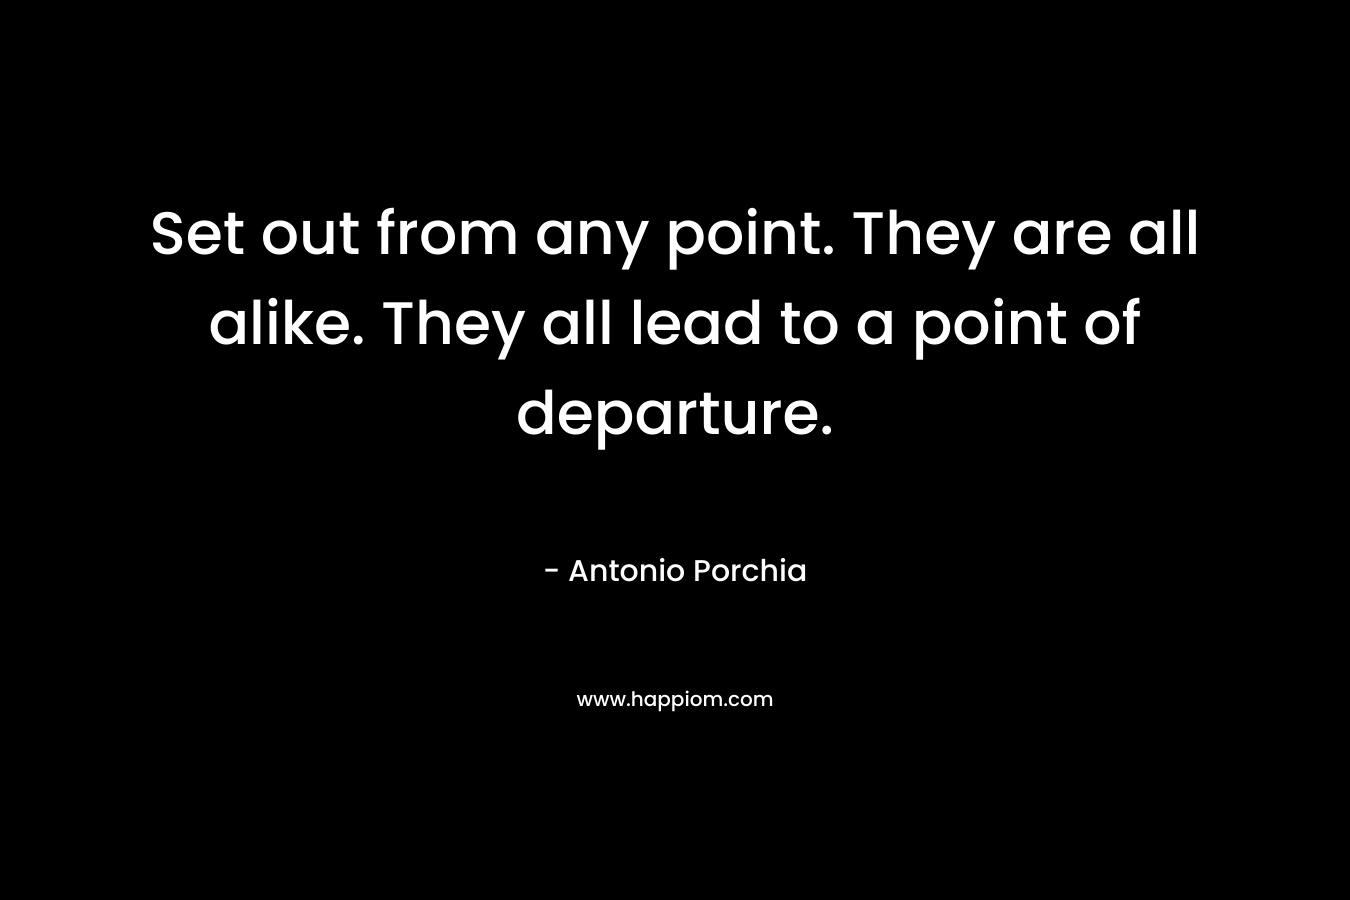 Set out from any point. They are all alike. They all lead to a point of departure. – Antonio Porchia